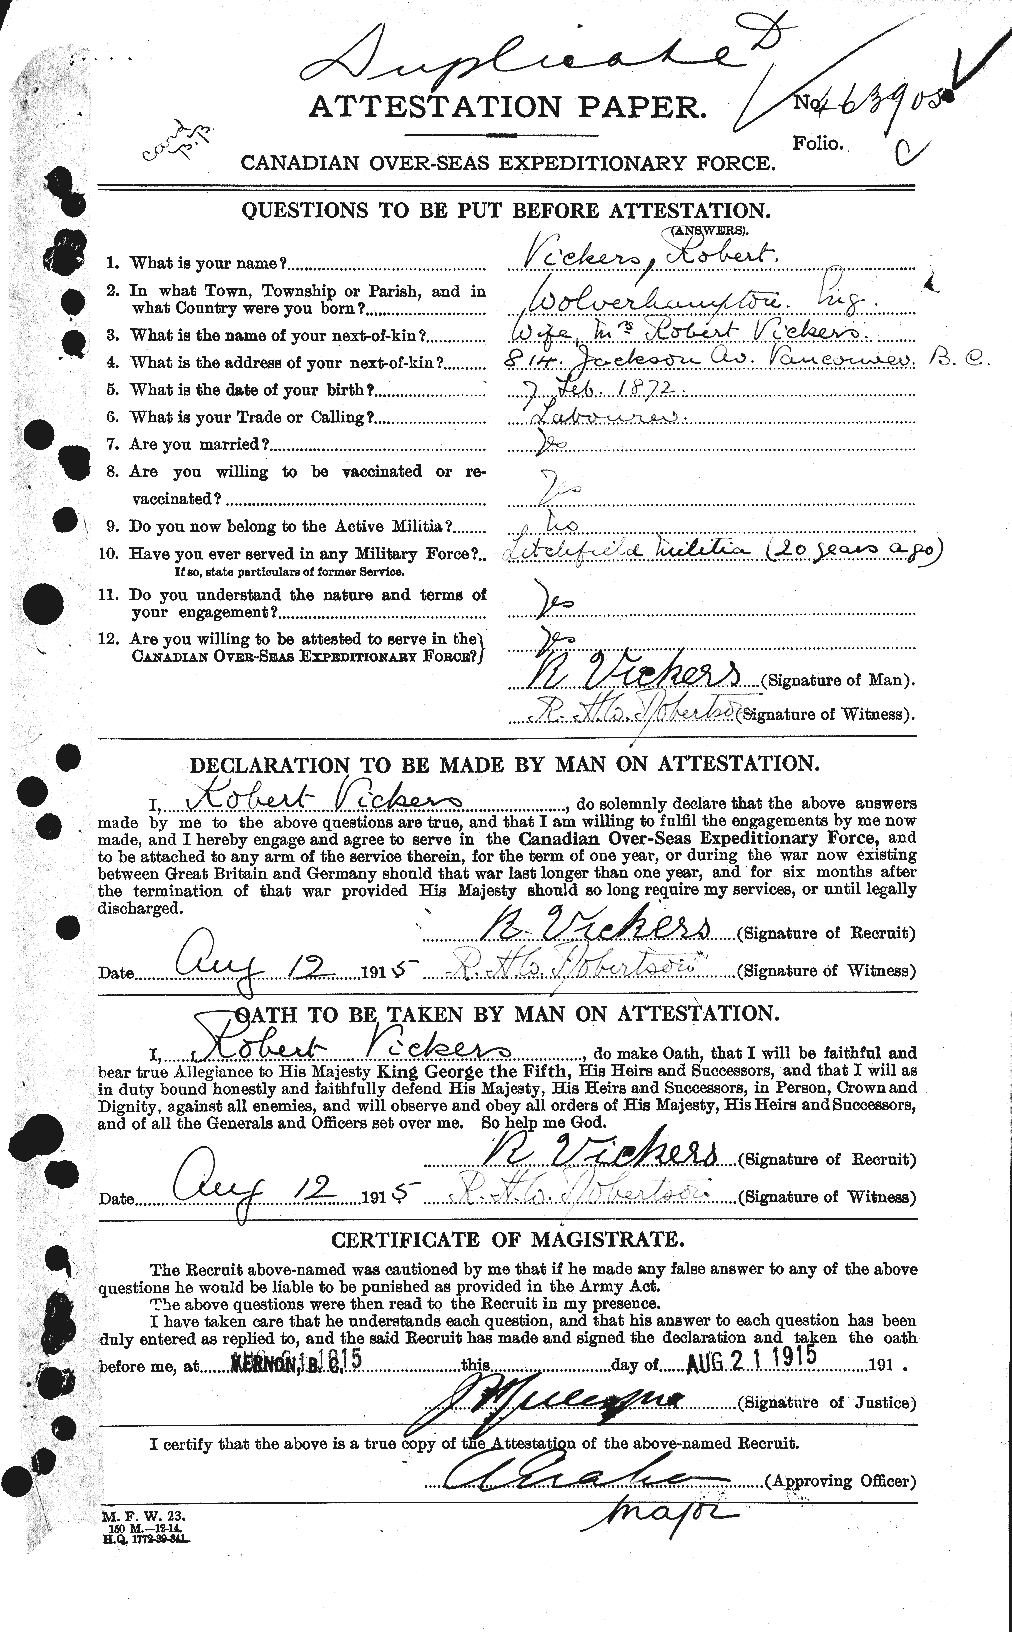 Personnel Records of the First World War - CEF 652226a